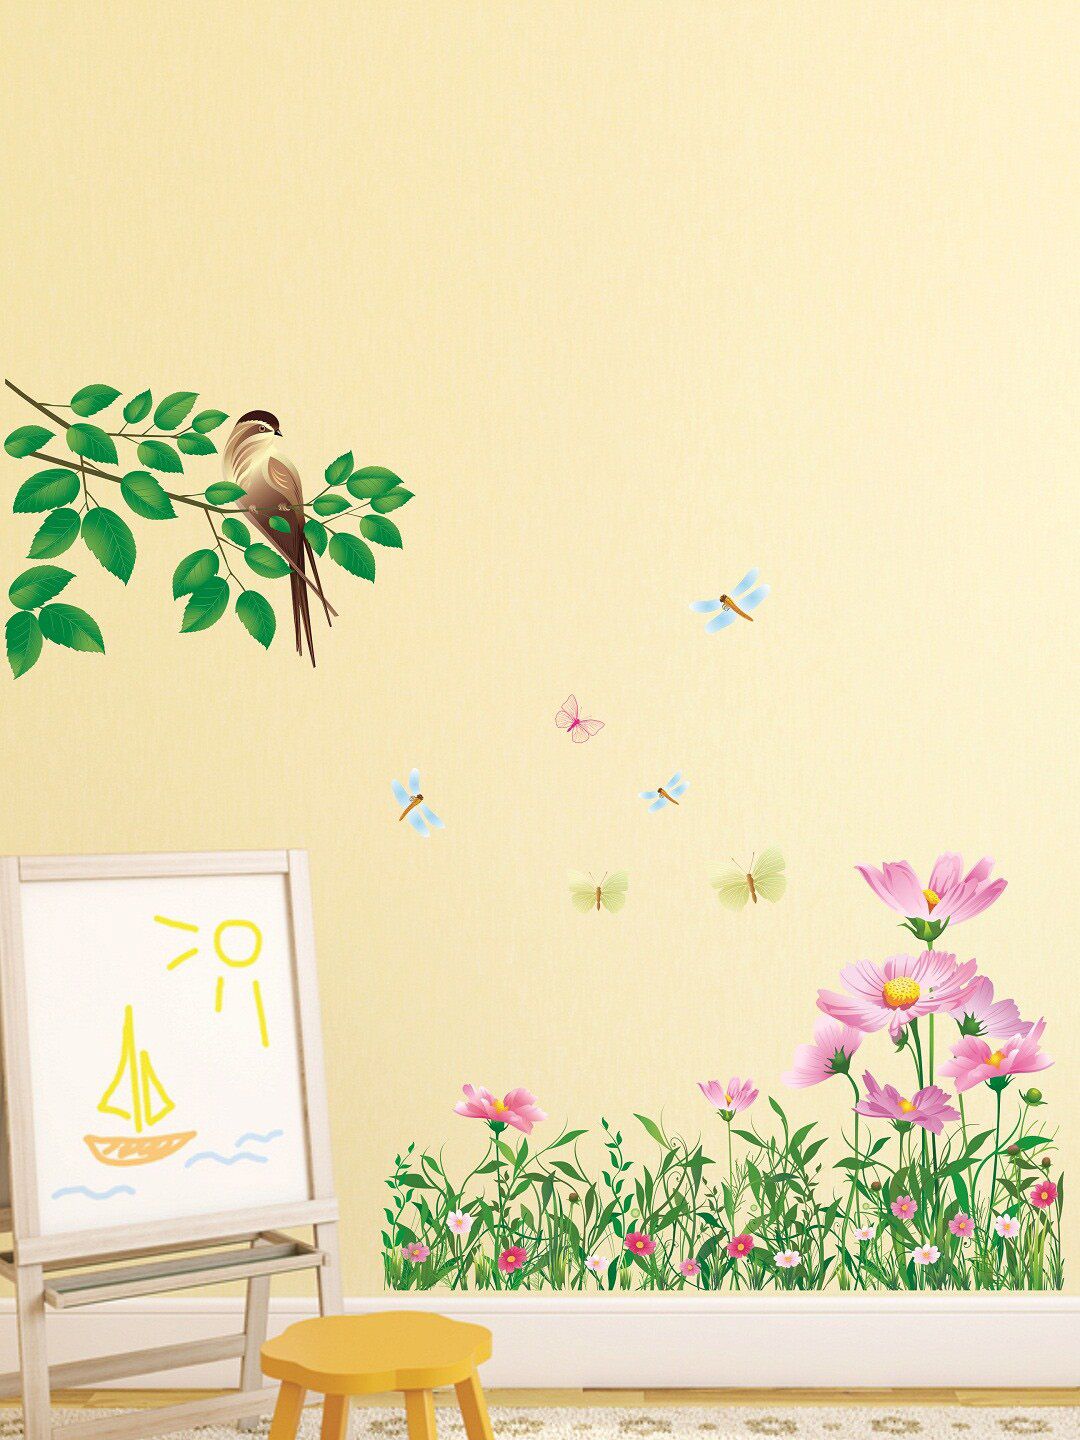 WALLSTICK Green & Pink Vinyl Large Wall Sticker Price in India